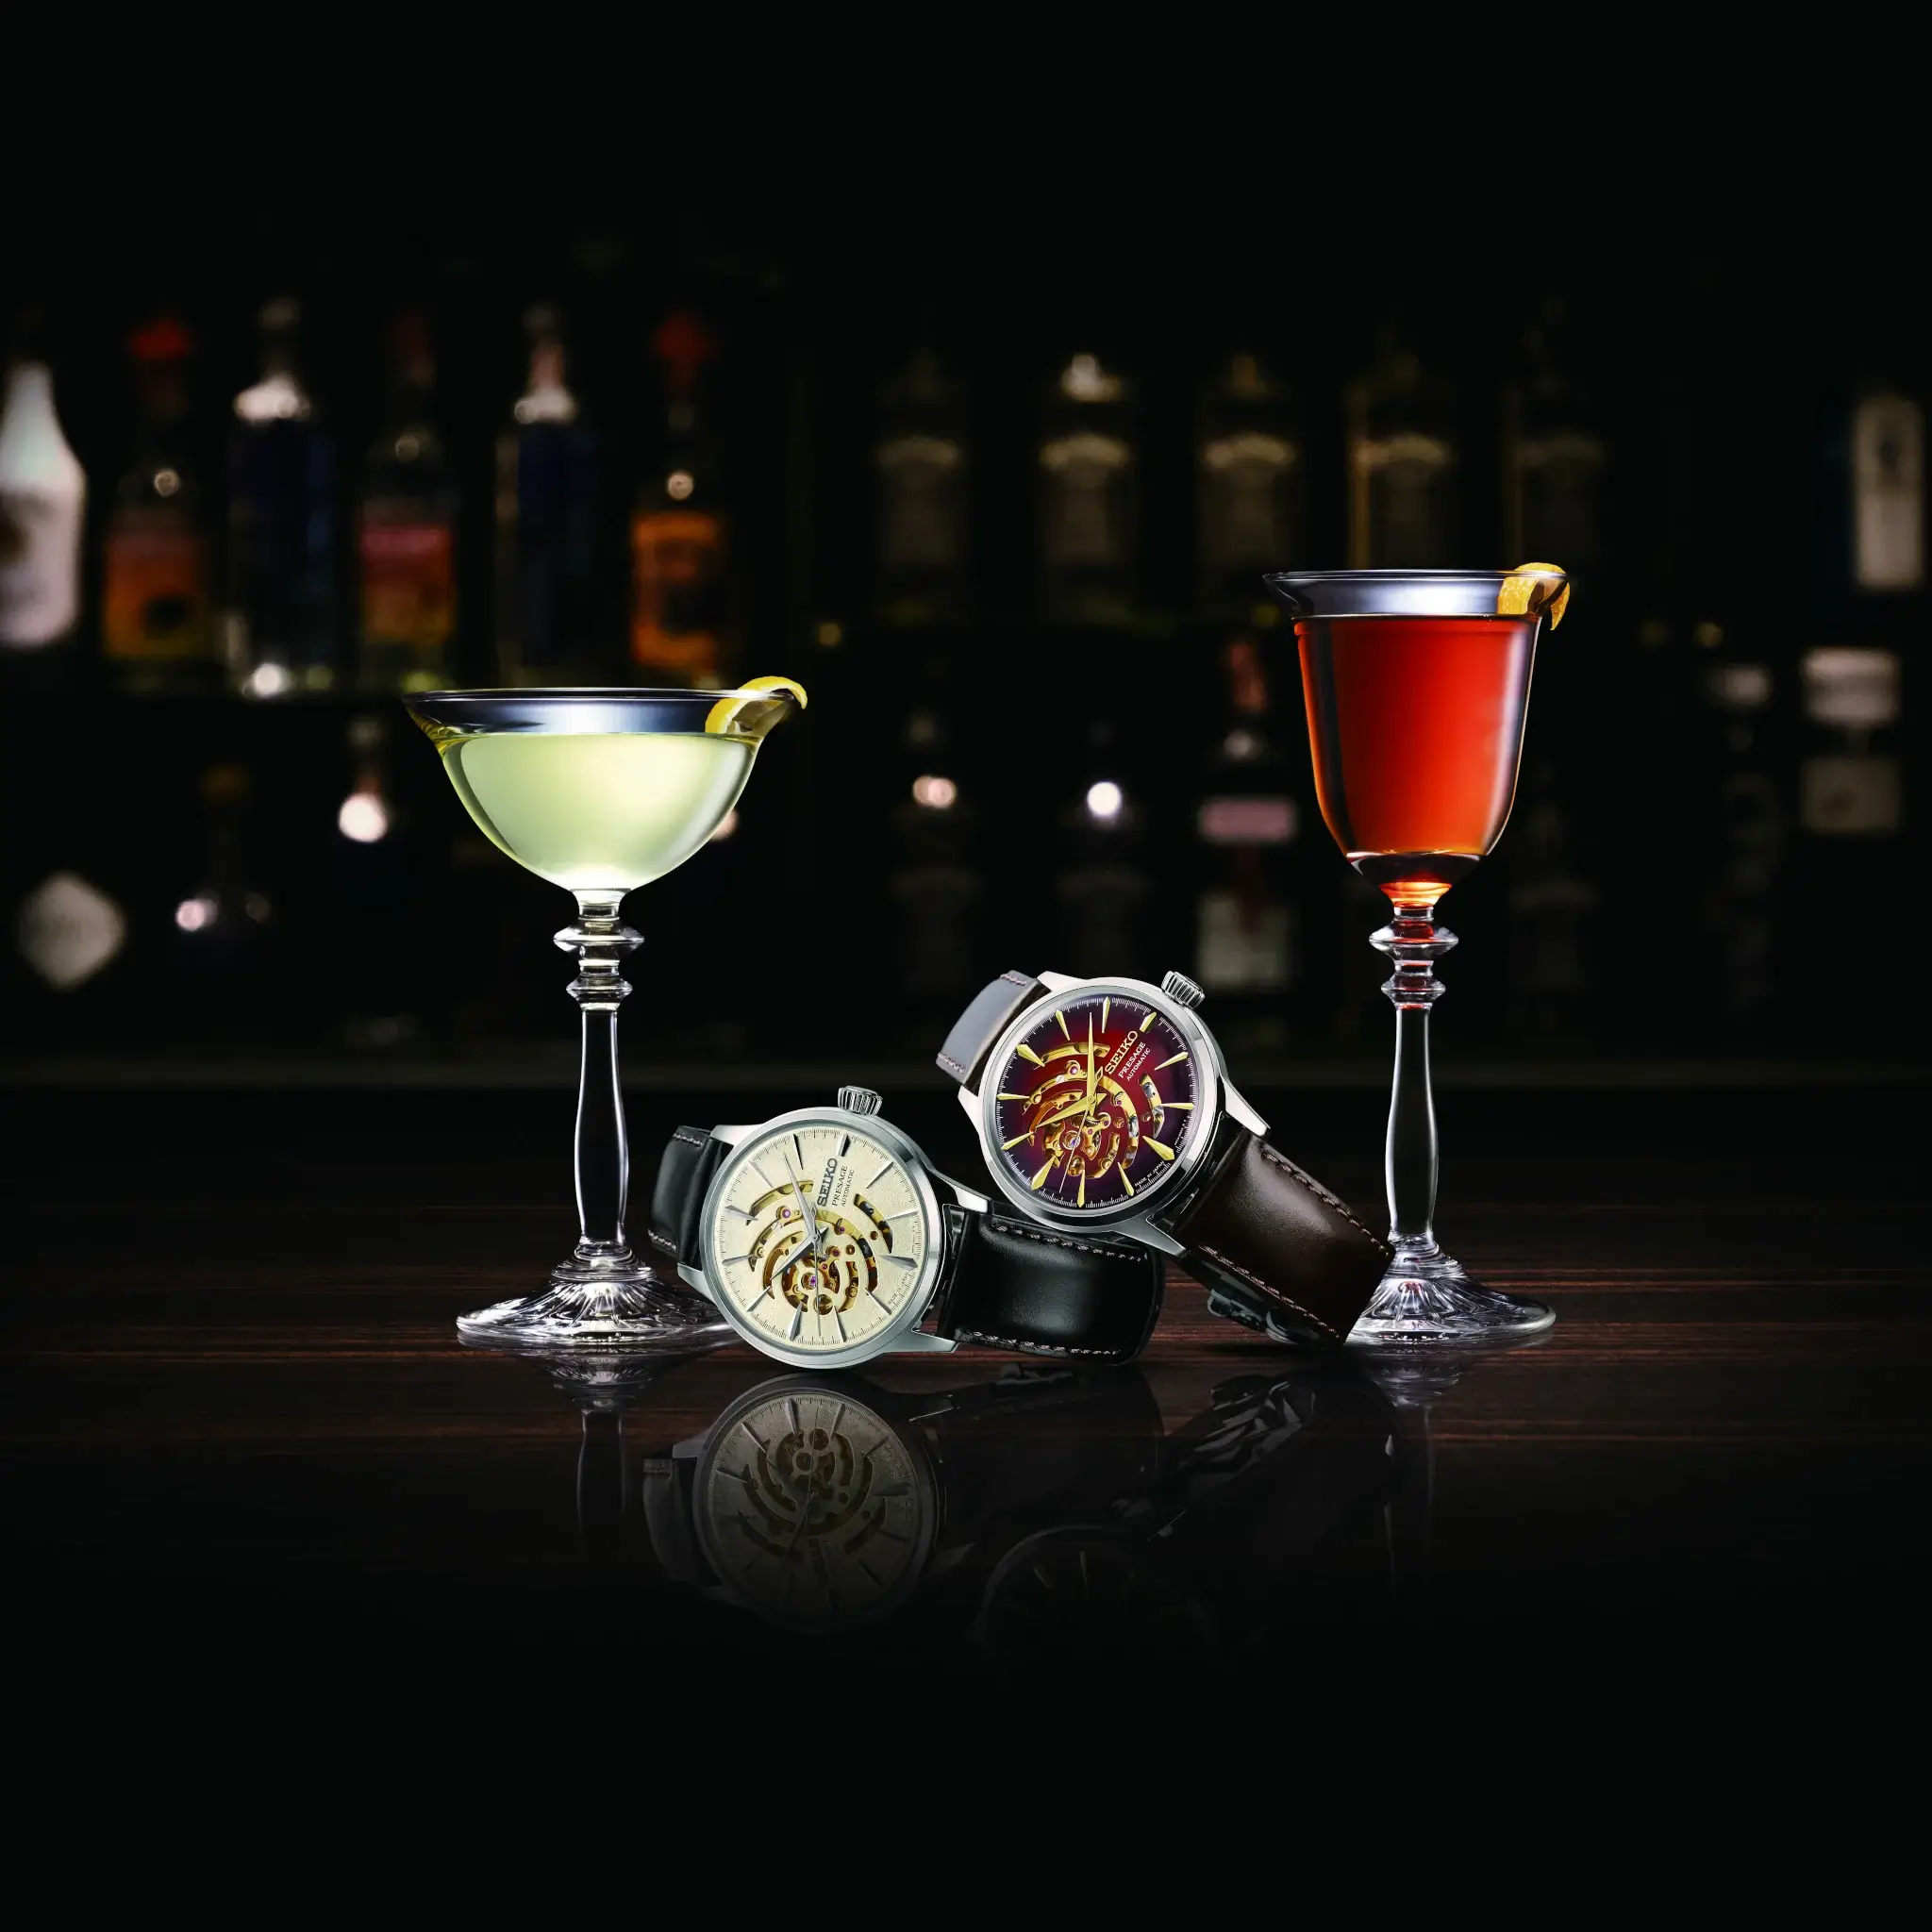 Mixology Meets Horology With Seiko’s Latest STAR BAR Collection